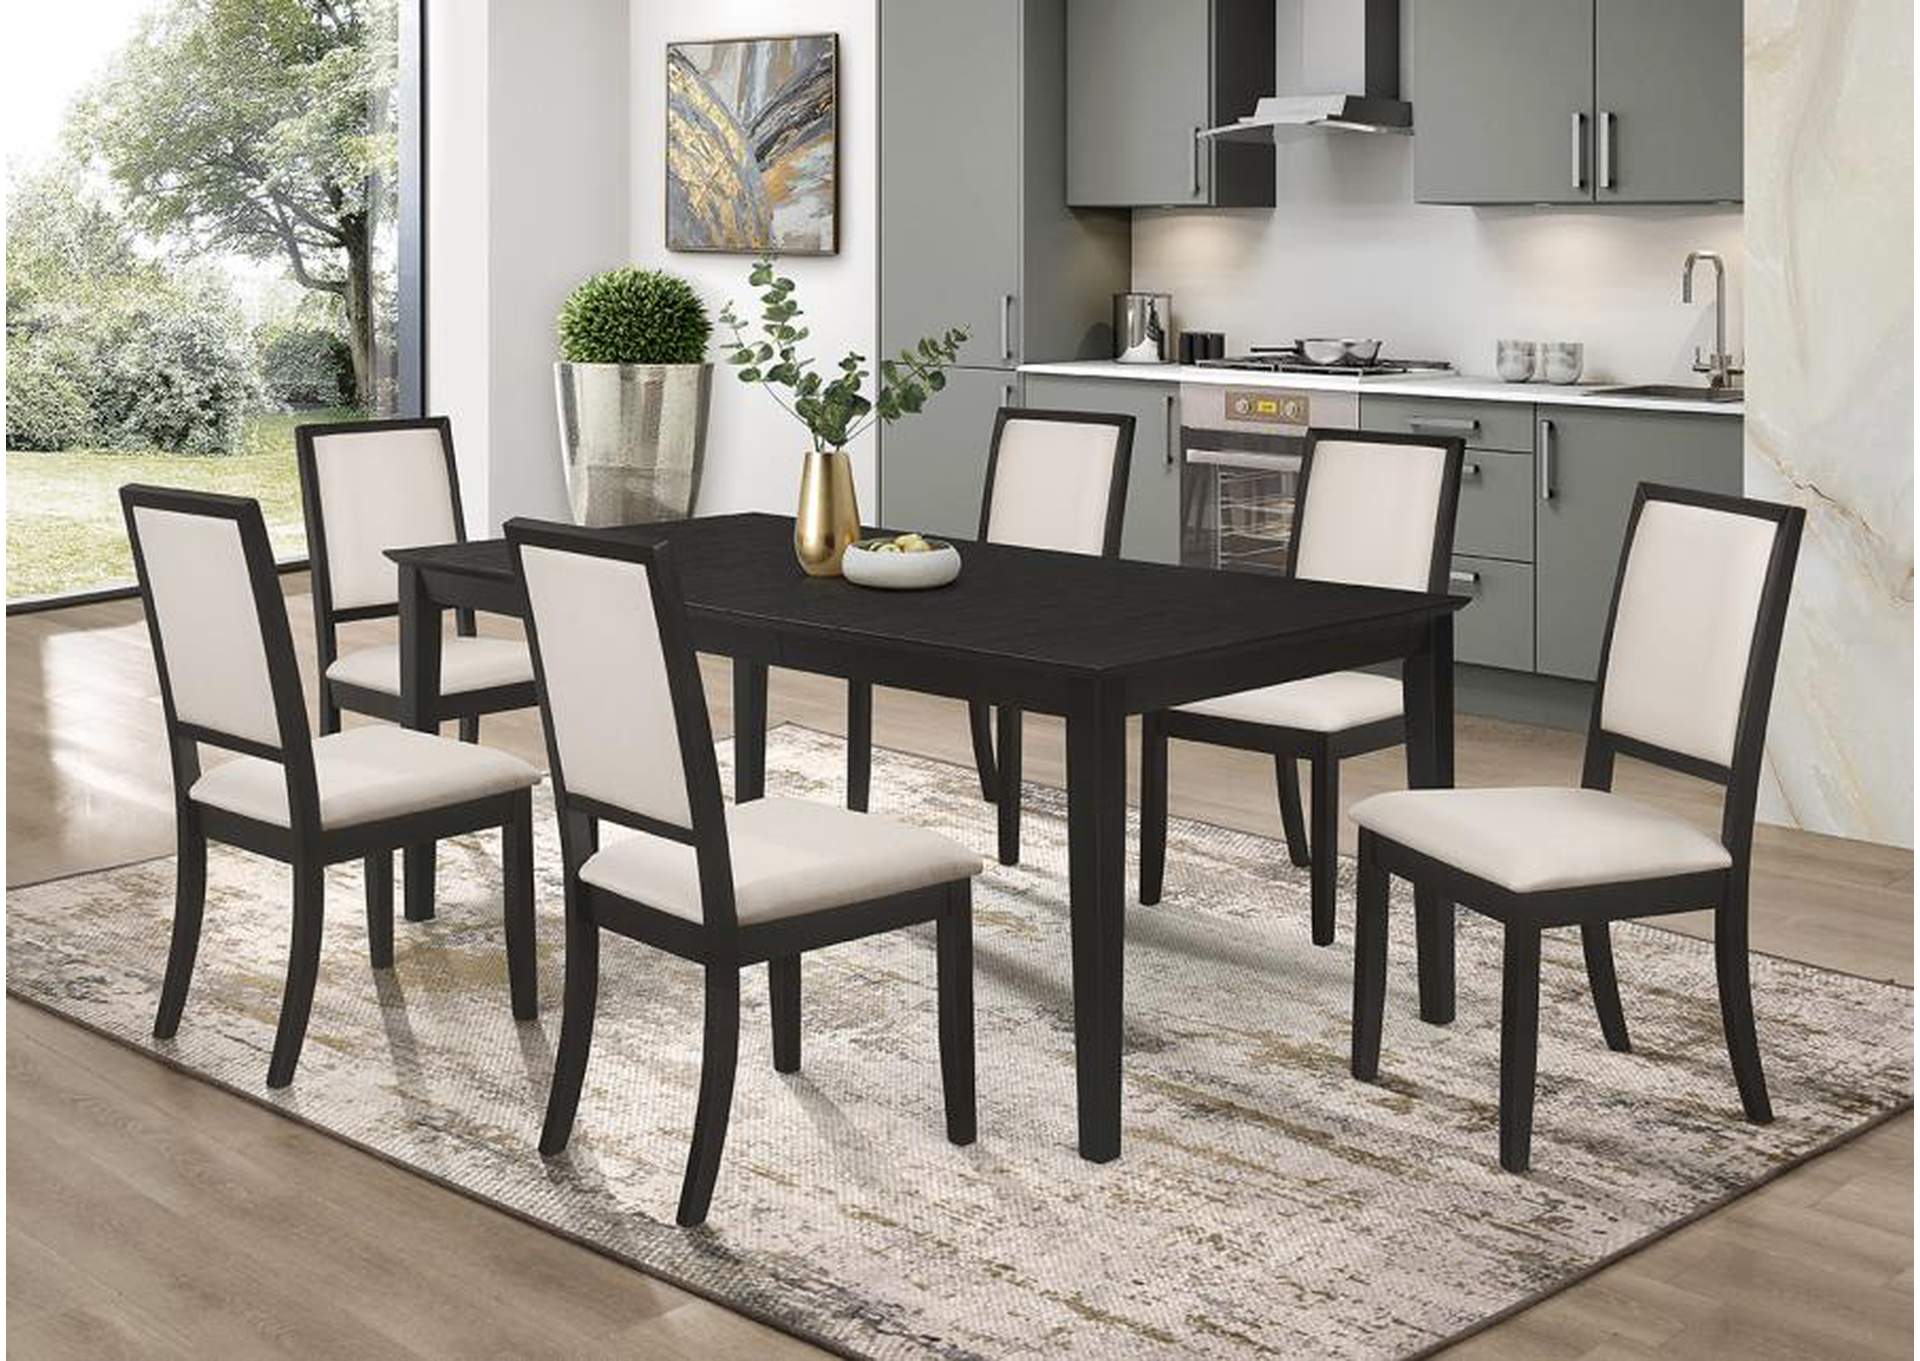 What Color Chairs With A Black Dining Table